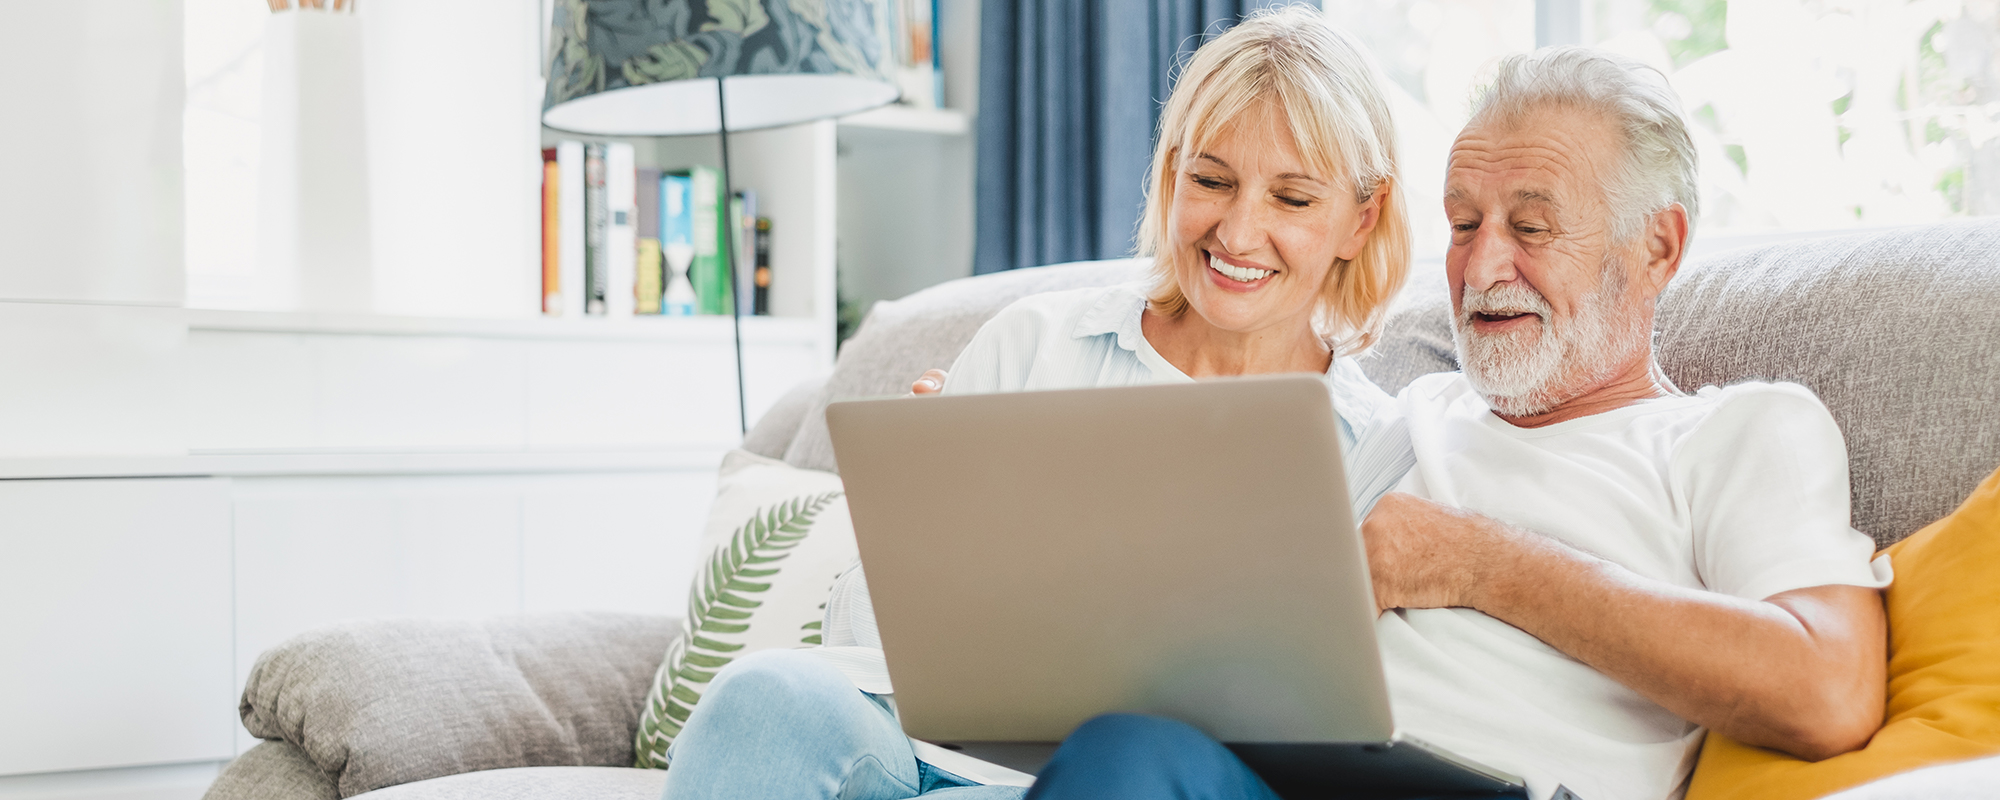 older man and woman smiling looking at a laptop | Beginner's guide to using email